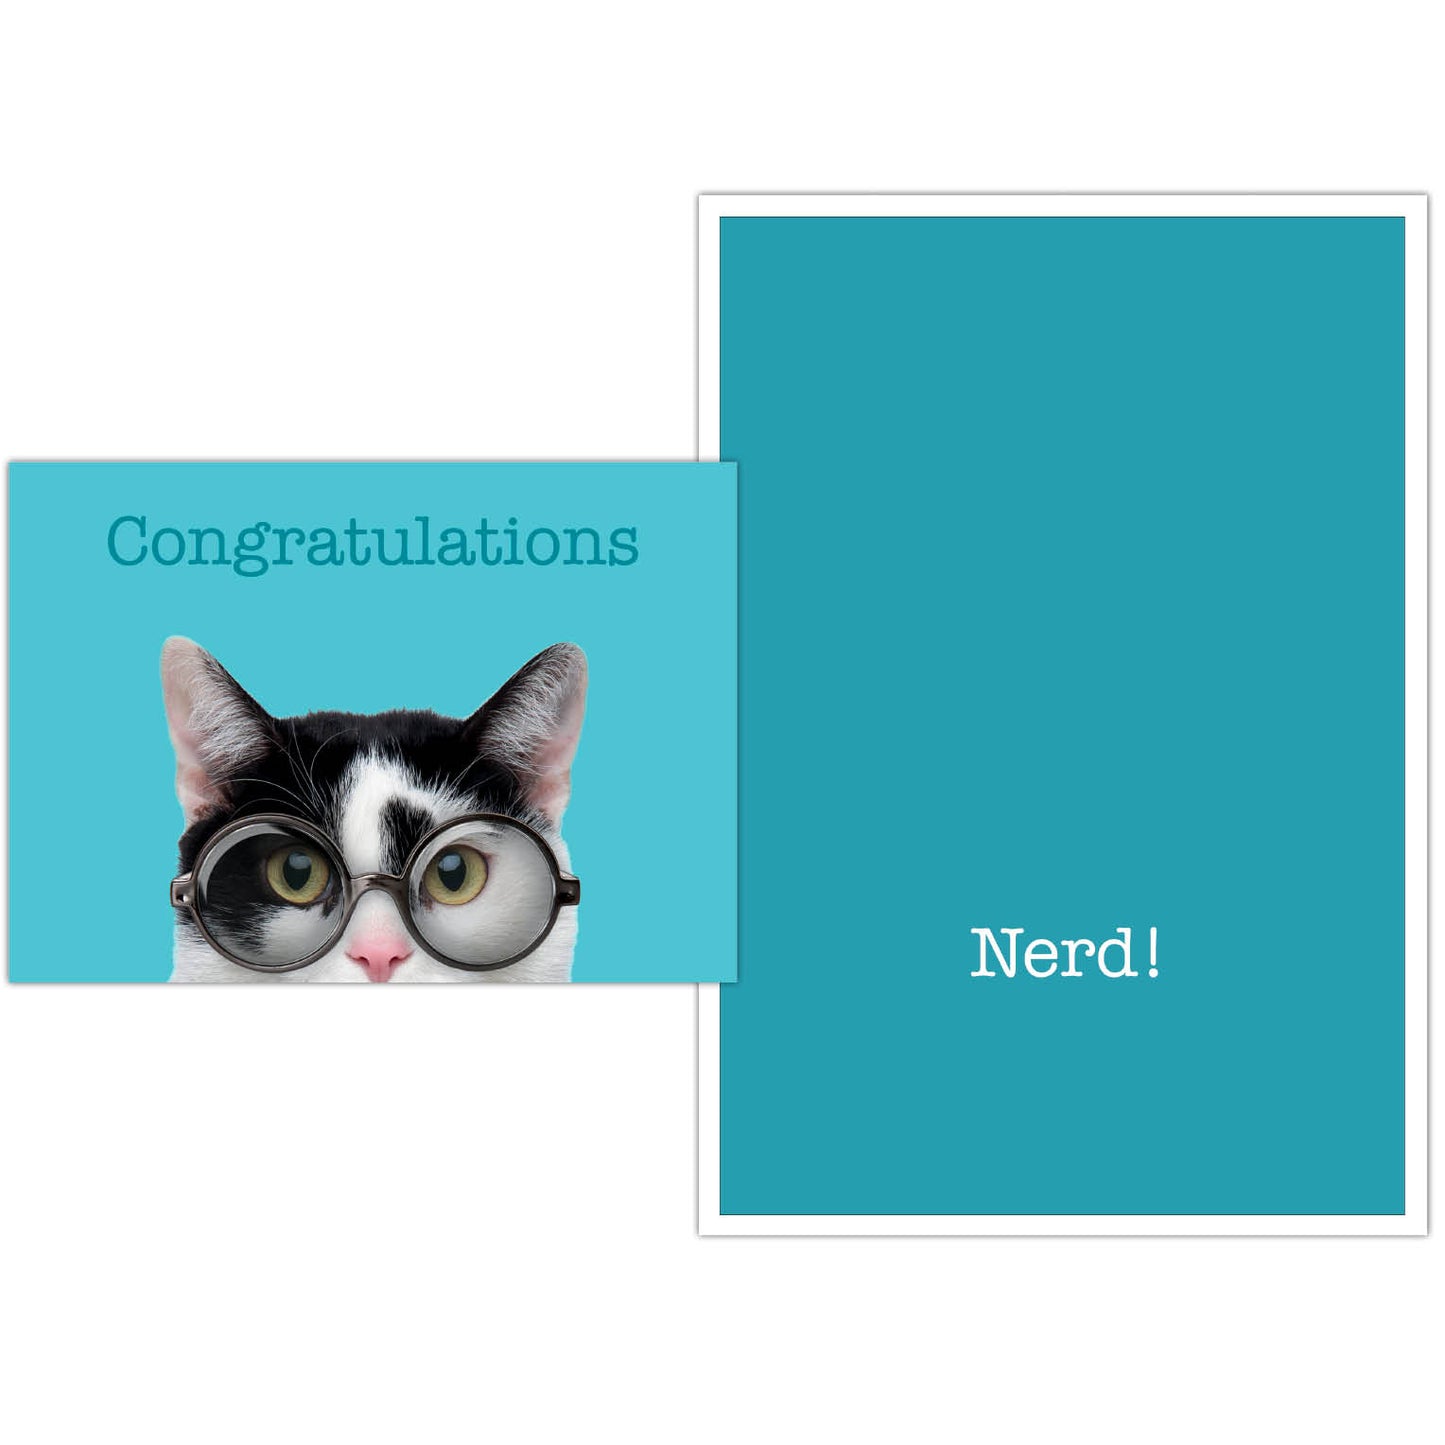 Cat and Glasses Congratulations greeting card